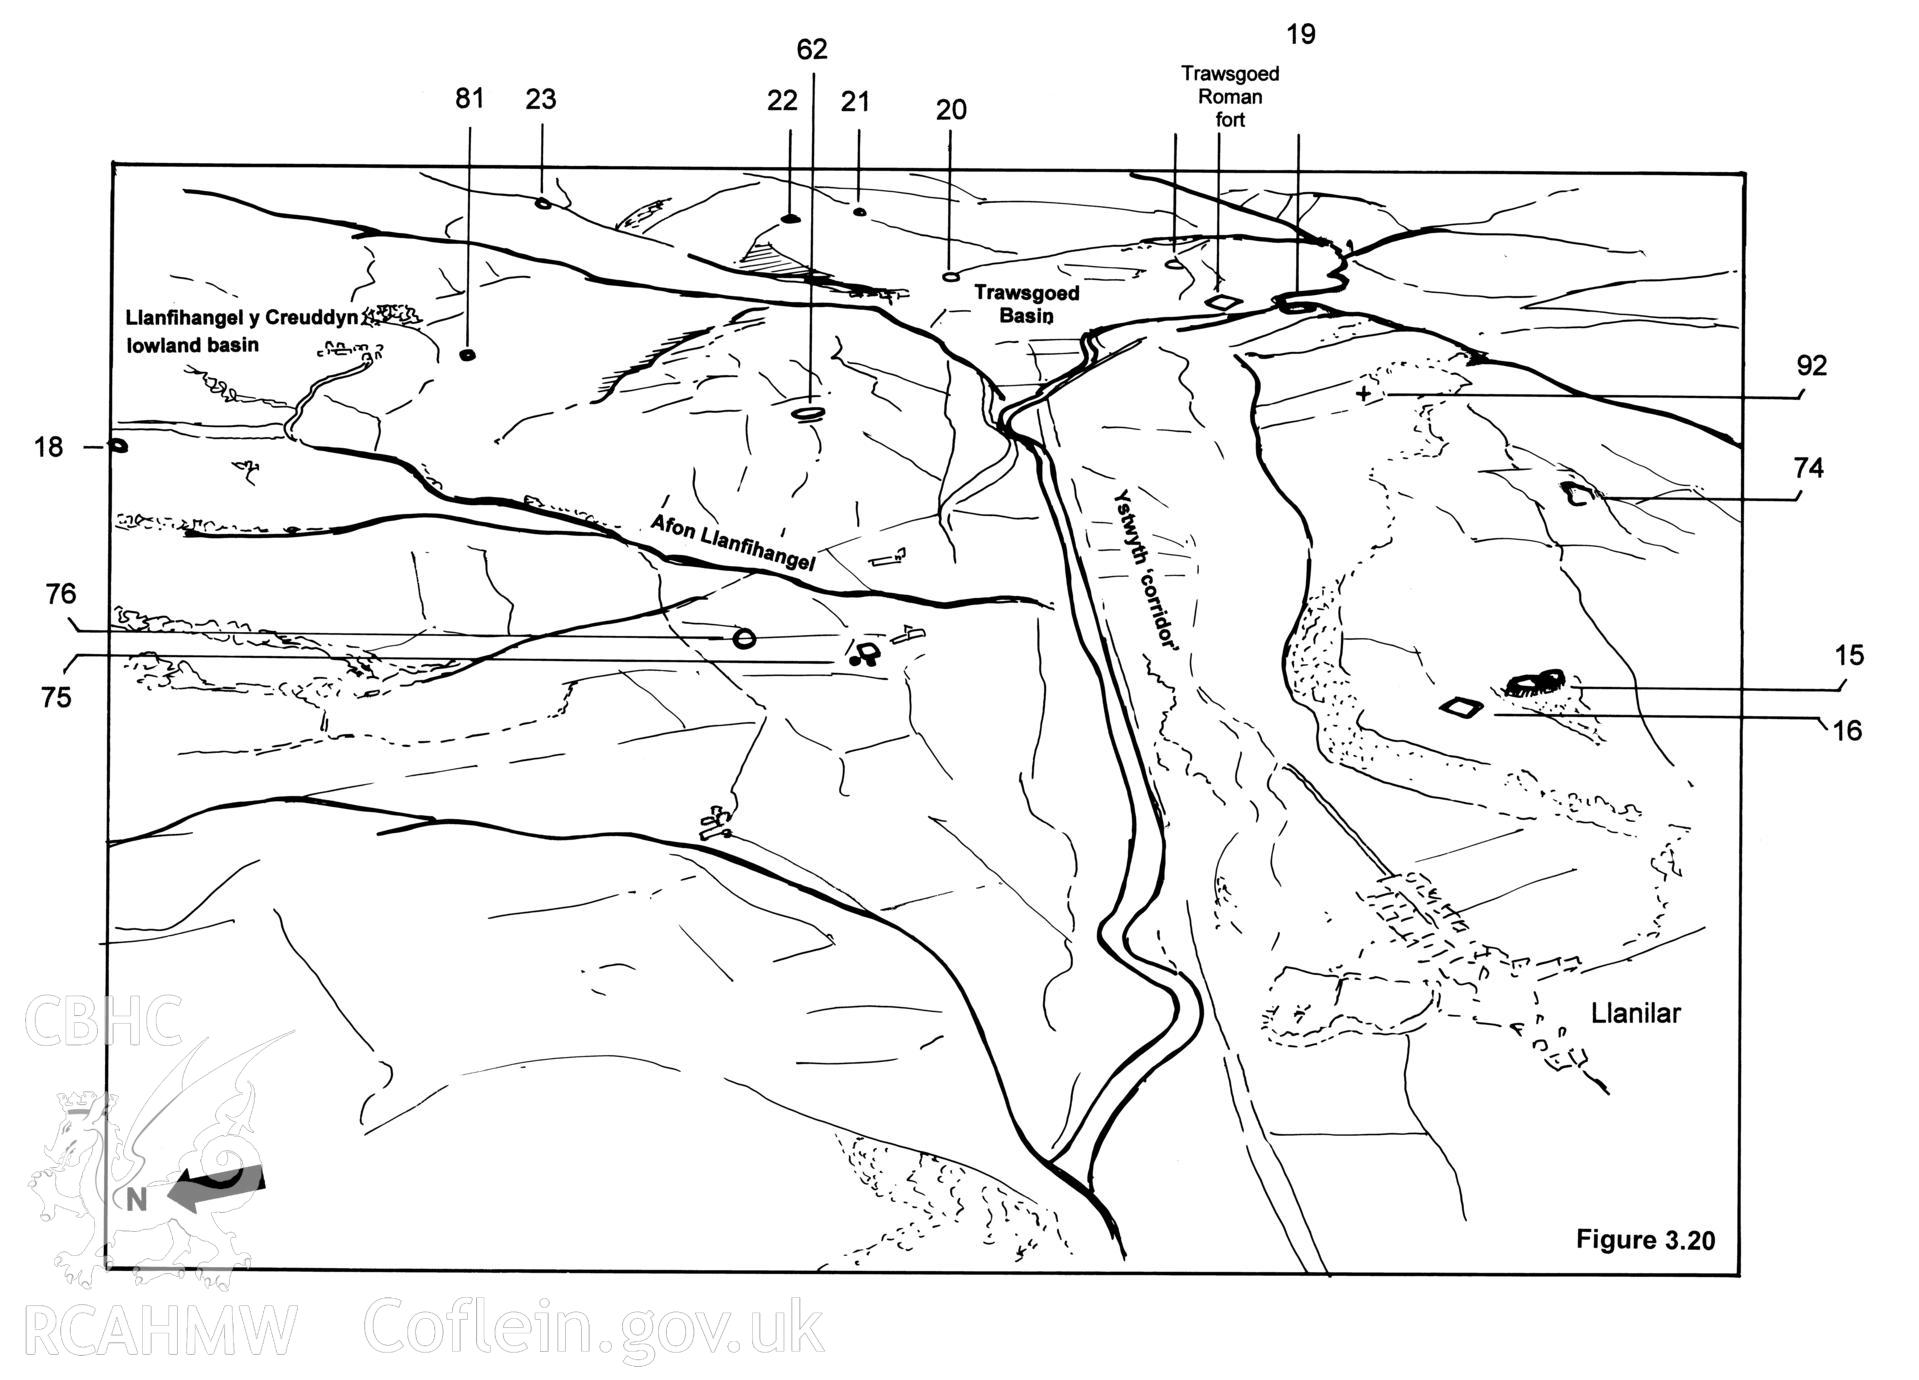 Digital copy of a pen and ink drawing of a view down the Ystwyth corridor, showing the position of Trawsgoed Roman Fort and surrounding sites, produced as part of a PHD thesis entitled "The Hillforts of North Ceredigion: Architecture, Landscape Approaches and Cultural Contexts", by Toby Driver, 2005. Originals not yet deposited in NMR Archive.